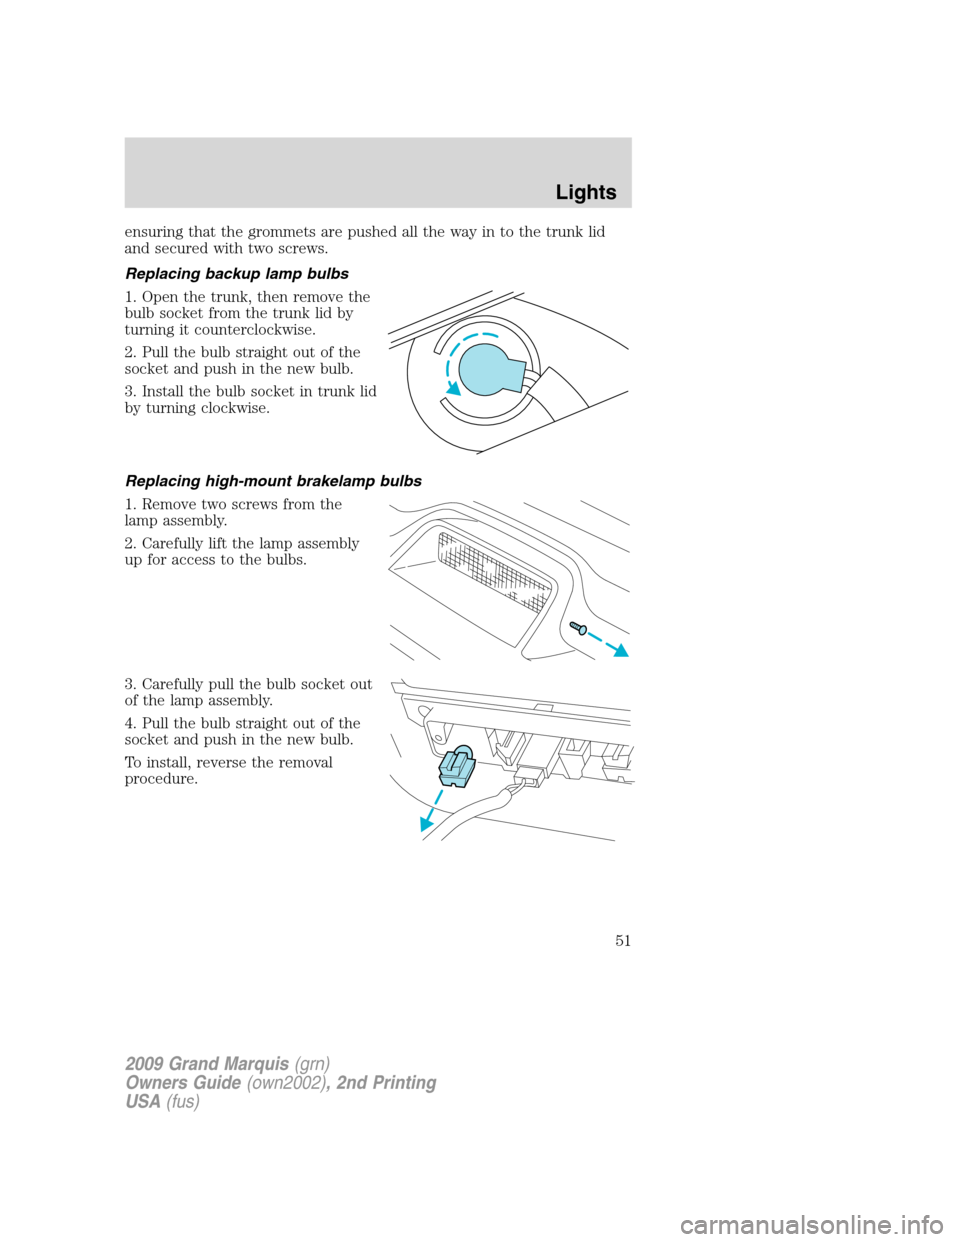 Mercury Grand Marquis 2009  Owners Manuals ensuring that the grommets are pushed all the way in to the trunk lid
and secured with two screws.
Replacing backup lamp bulbs
1. Open the trunk, then remove the
bulb socket from the trunk lid by
turn